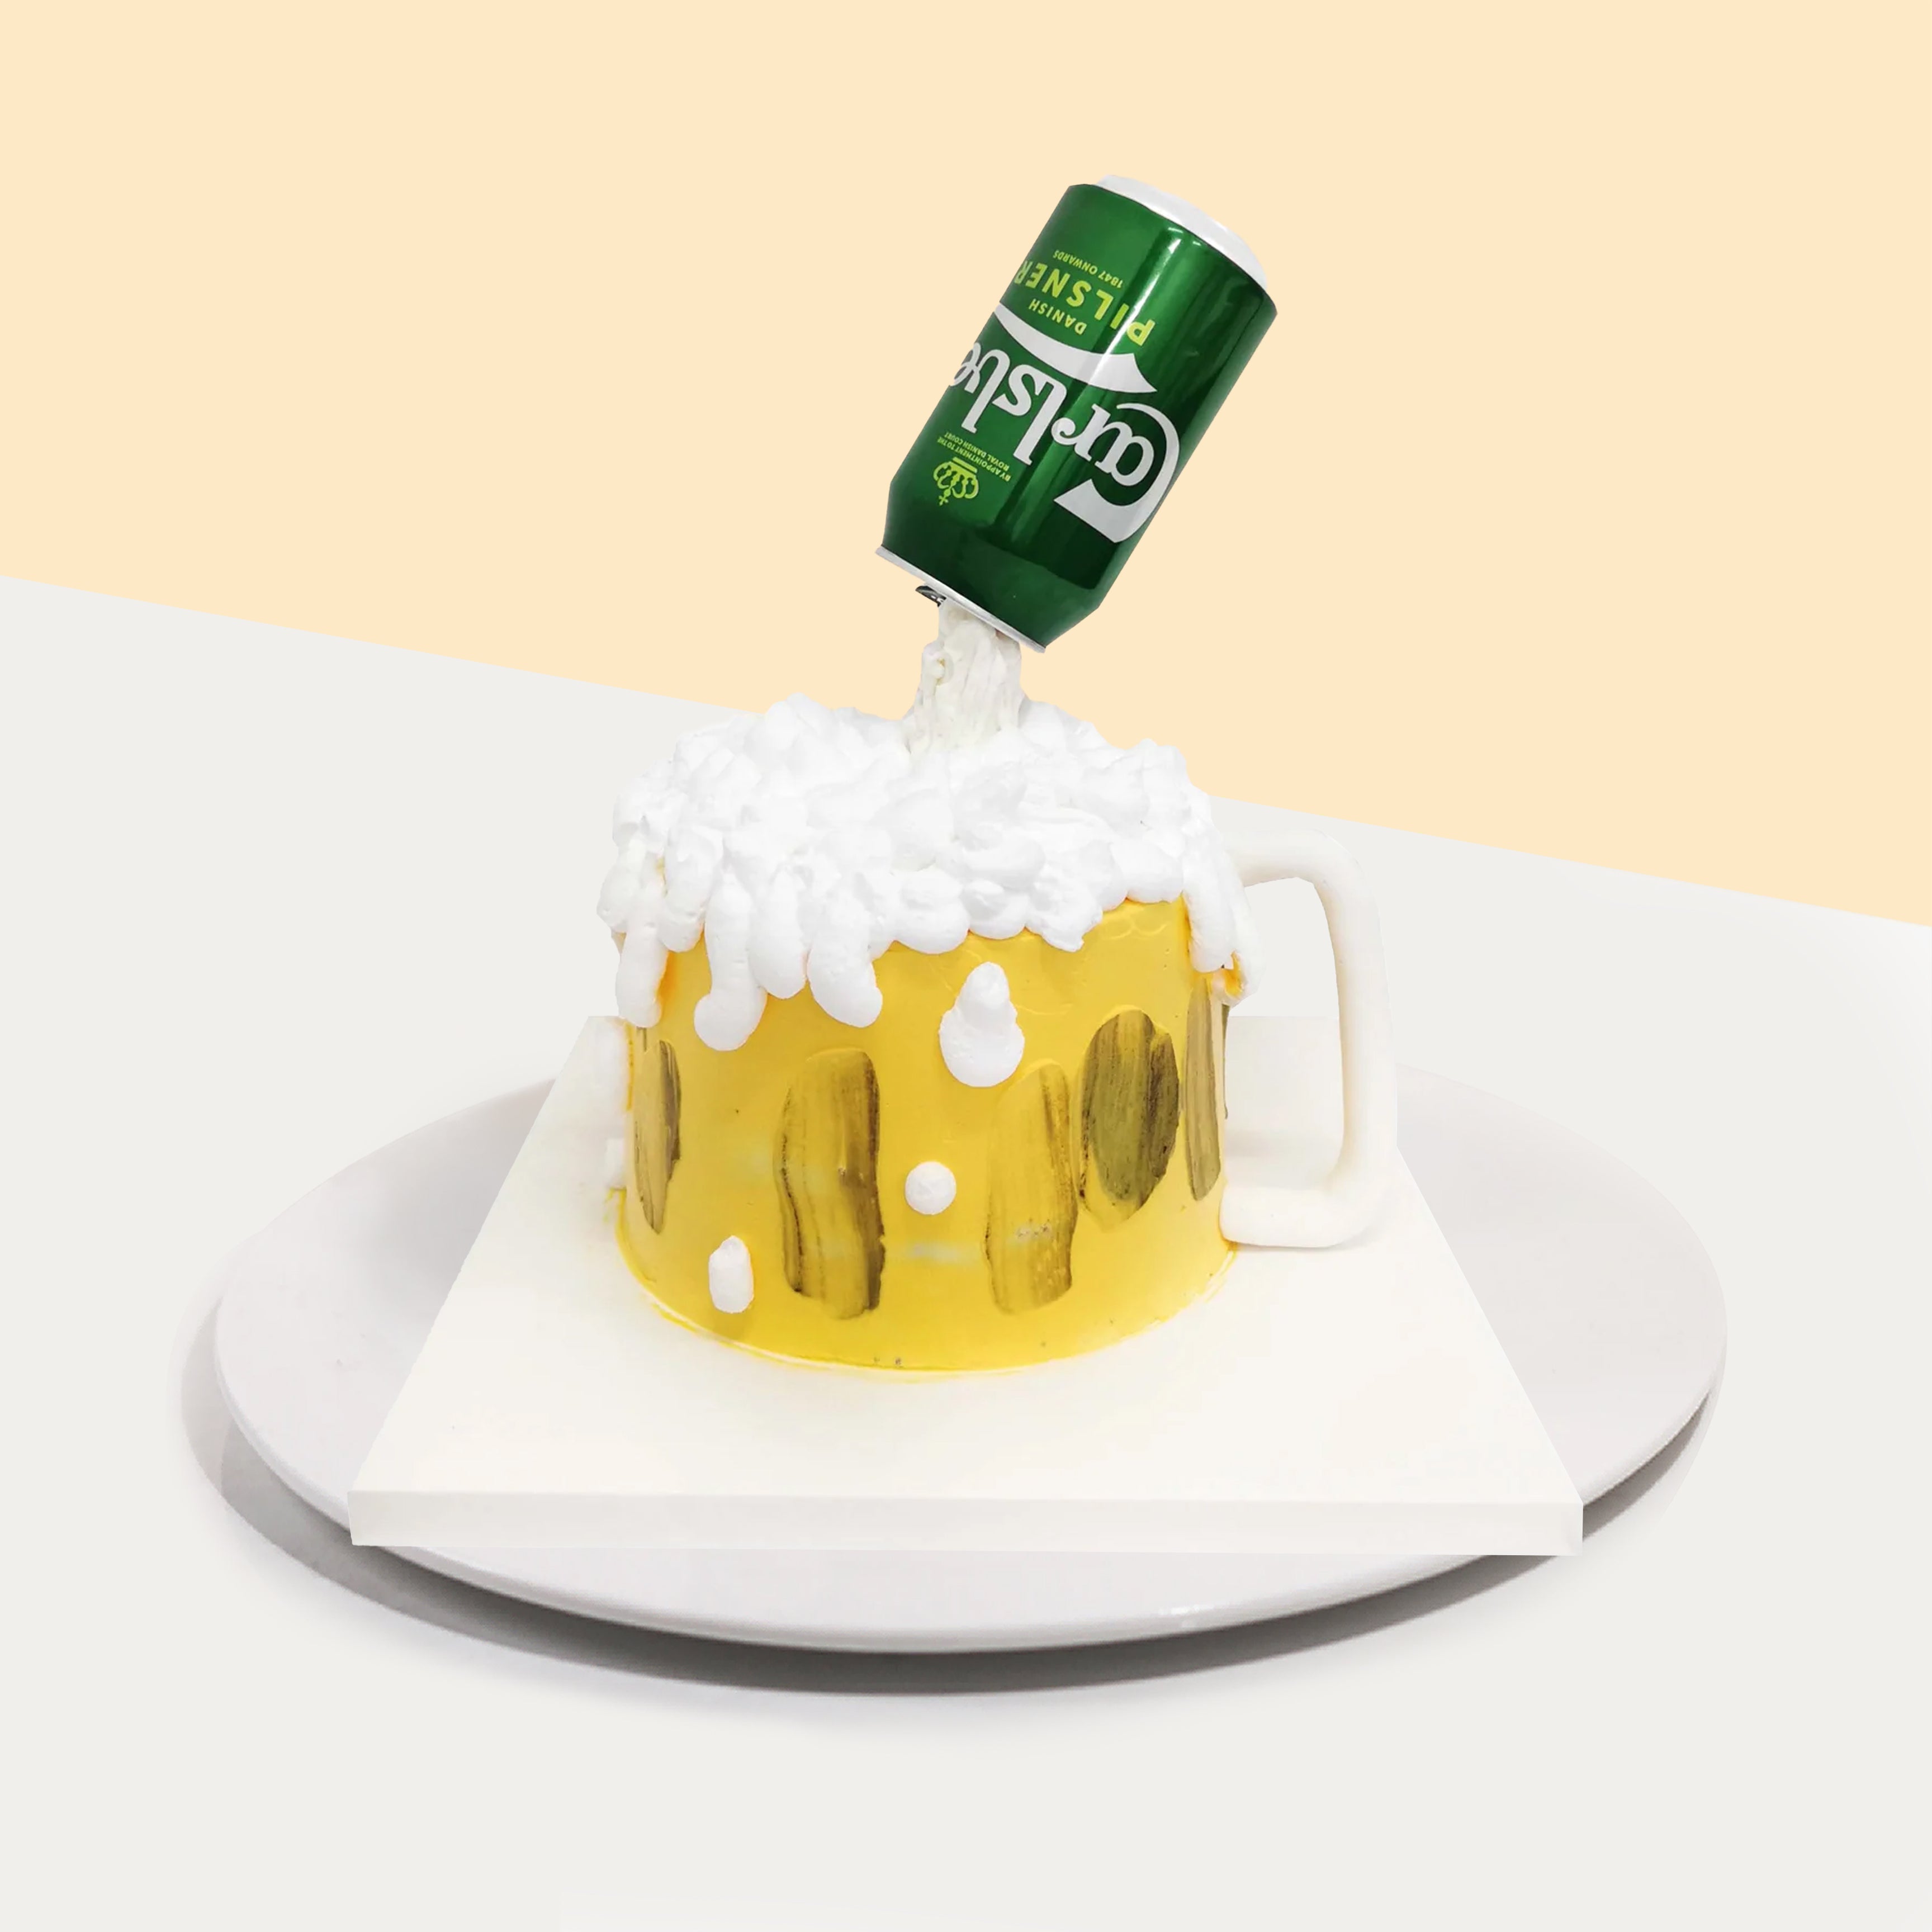 How To Make A Beer Can Cake (24 Can Version) - Brewquets